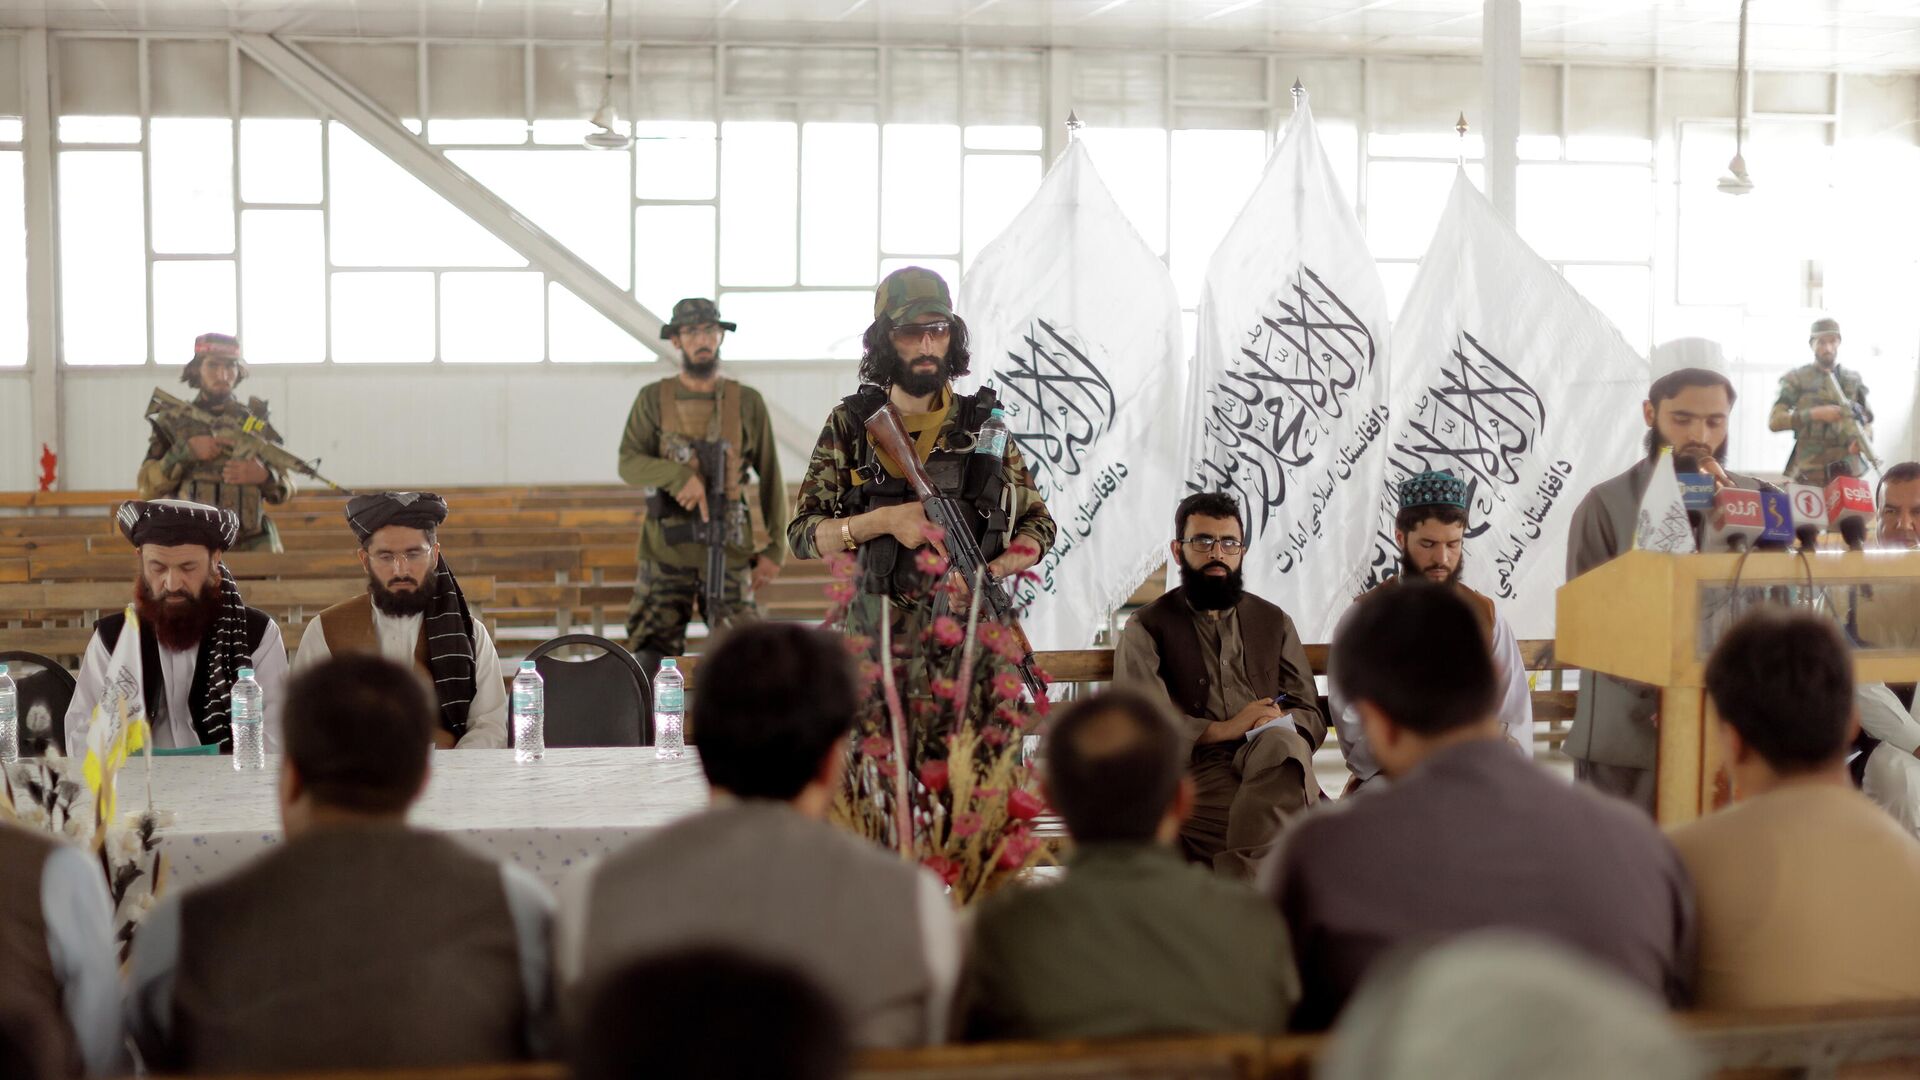 Afghanistan Taliban officials pray before the start of a news conference where they announced they will start issuing passports to its citizens again following months of delays that hampered attempts by those trying to flee the country after the Taliban seized control, in Kabul, Afghanistan October 5, 2021 - Sputnik International, 1920, 05.10.2021